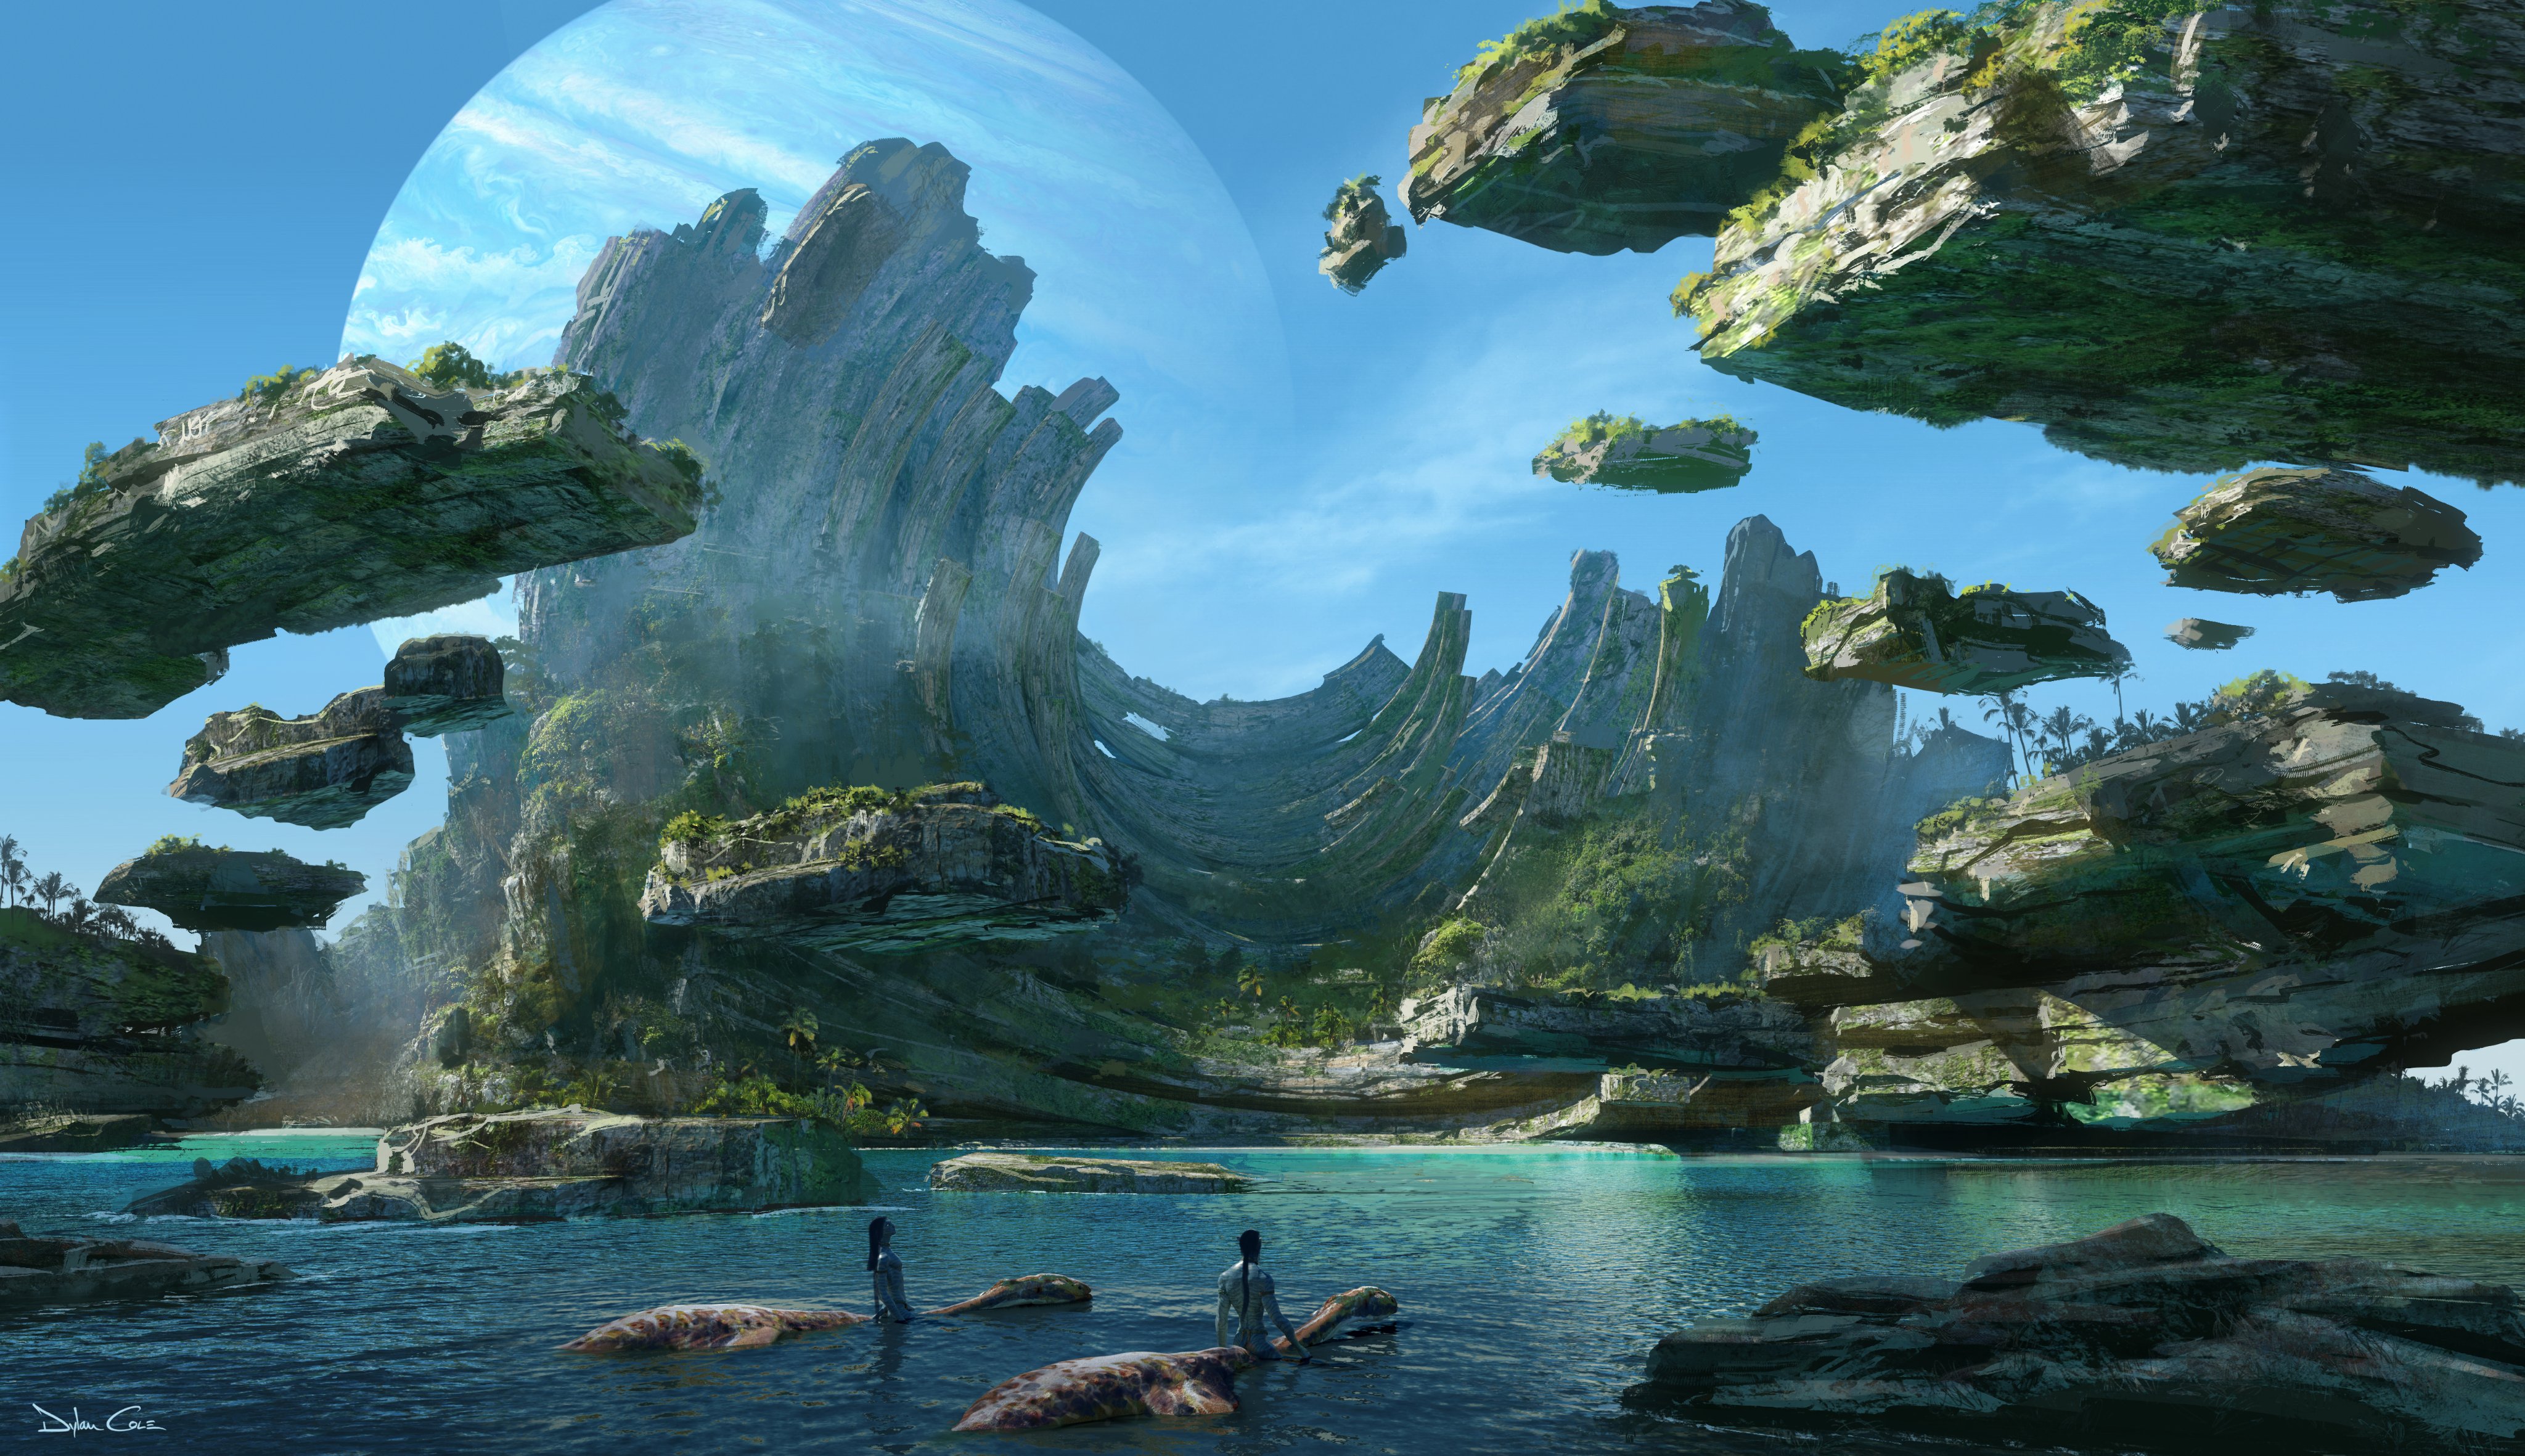 Avatar 2 concept art shows off new locales and creatures | The Nerdy